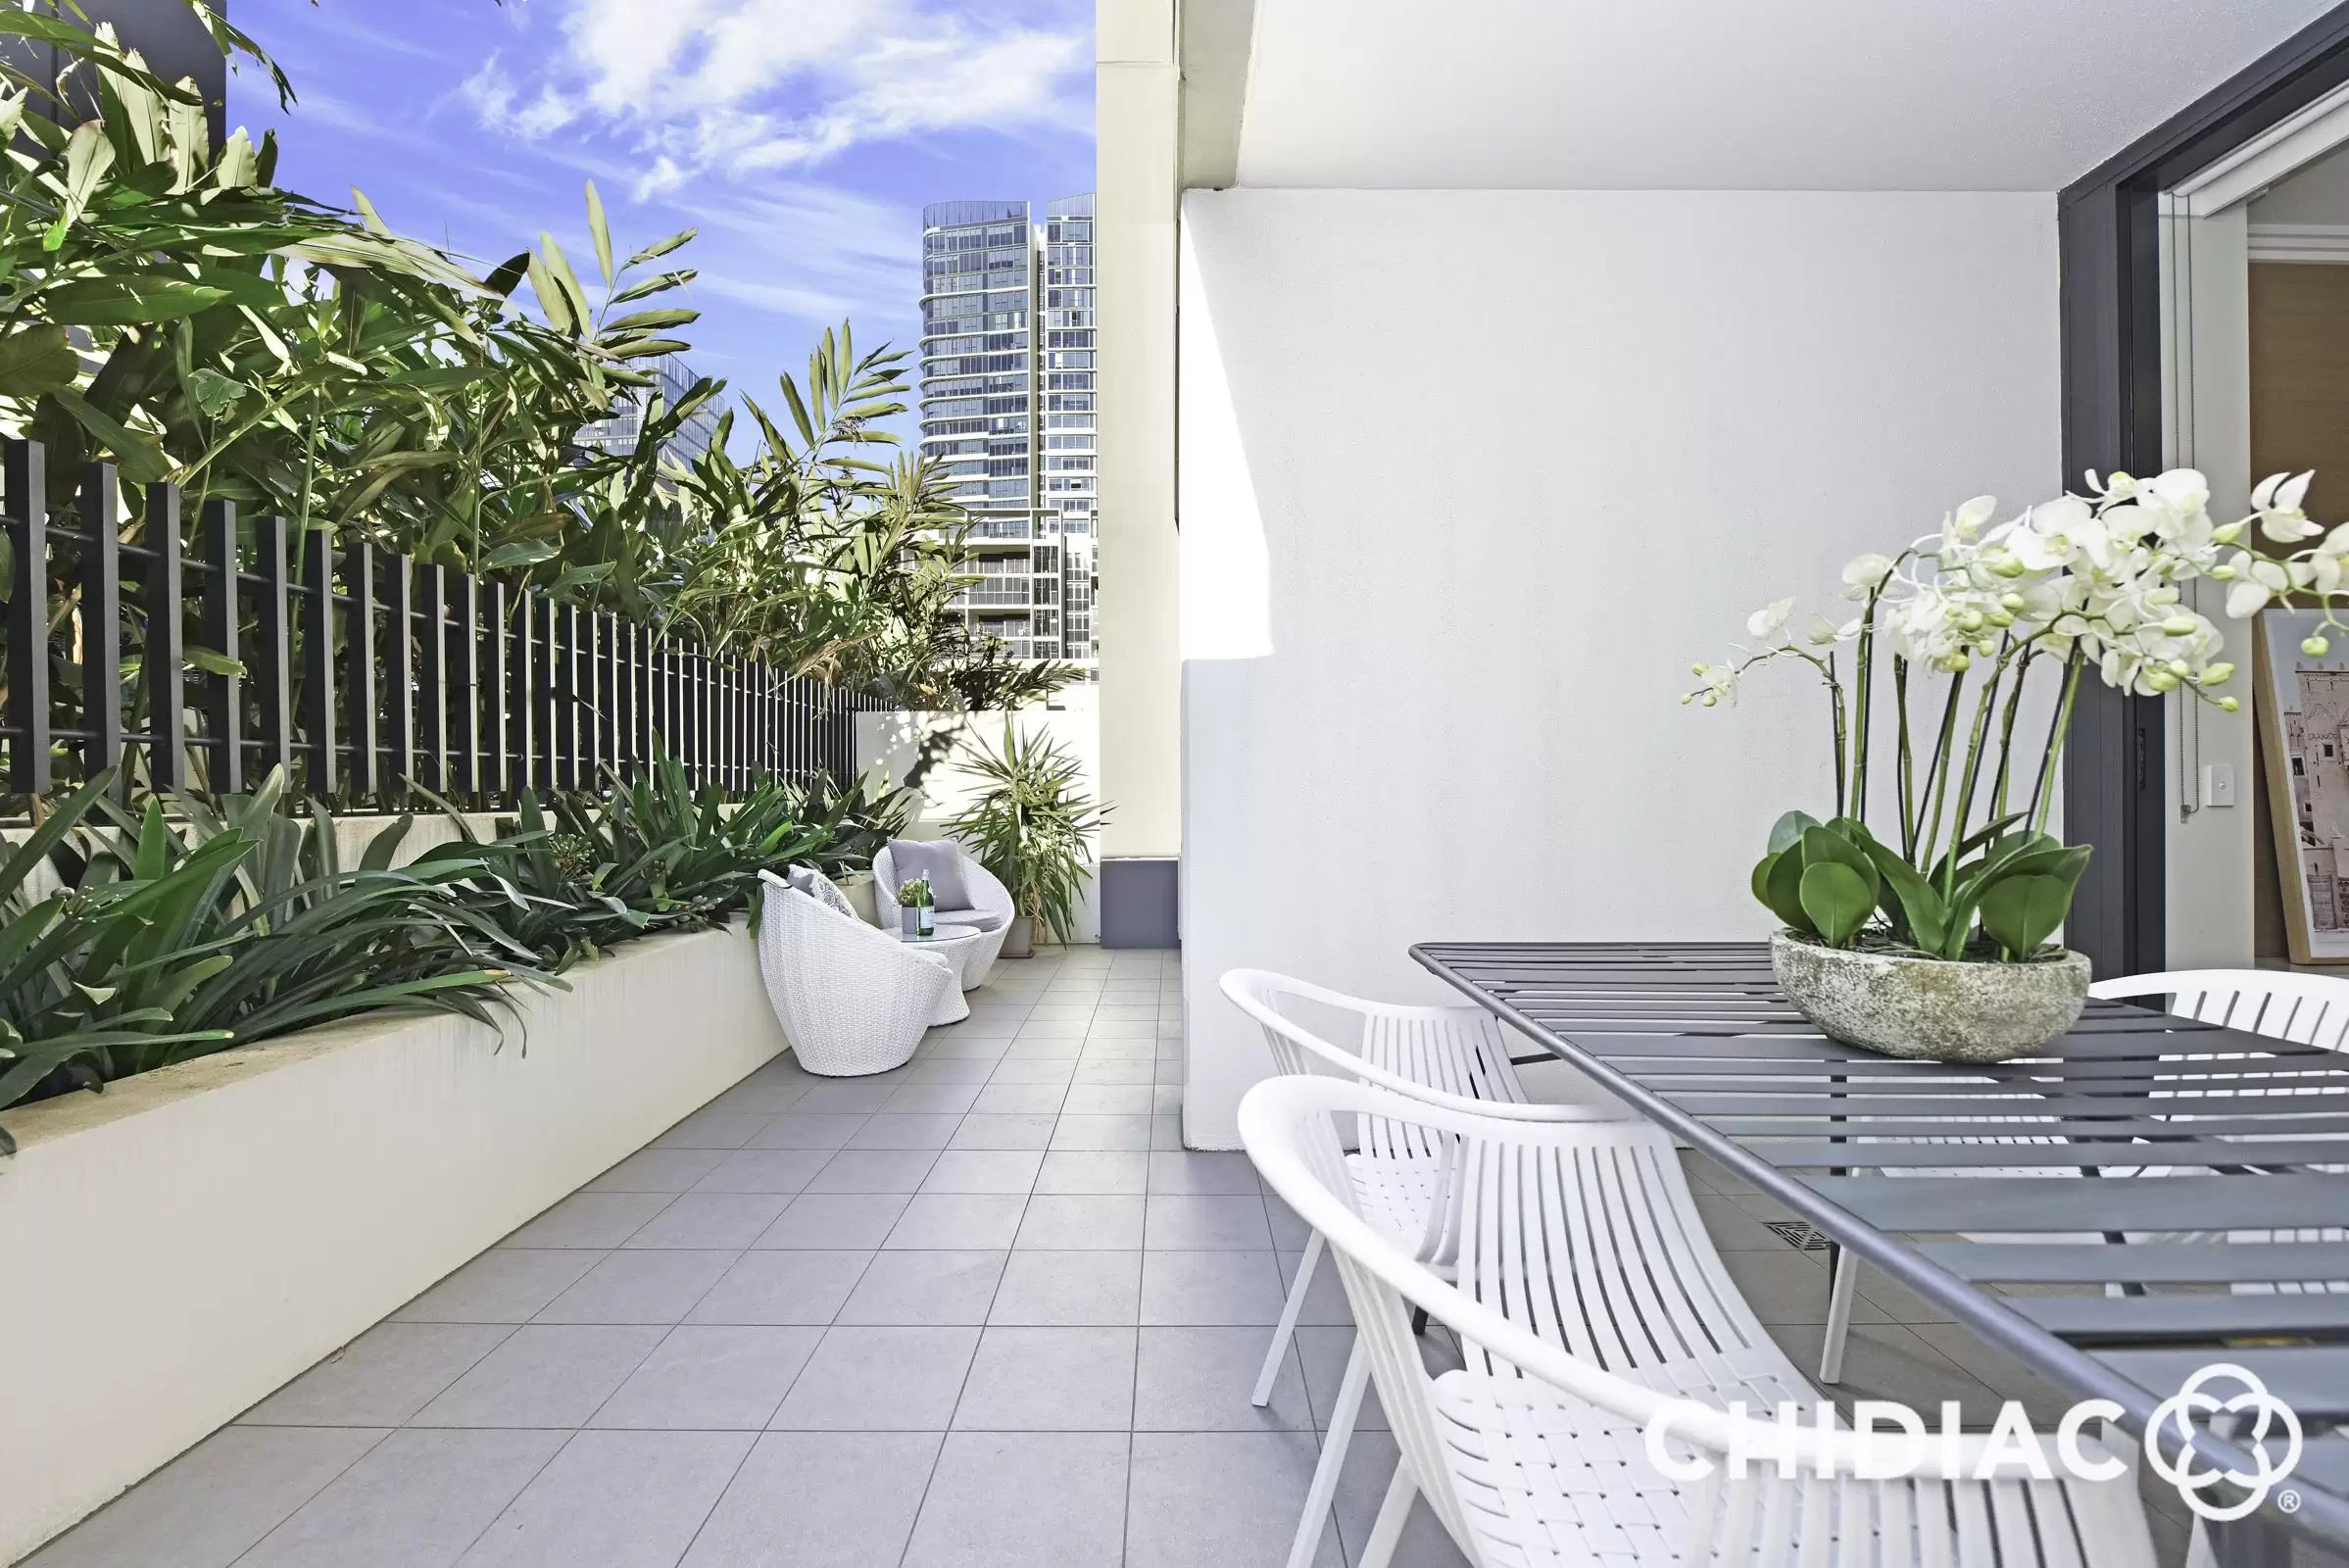 307/51 Hill Road, Wentworth Point Leased by Chidiac Realty - image 1